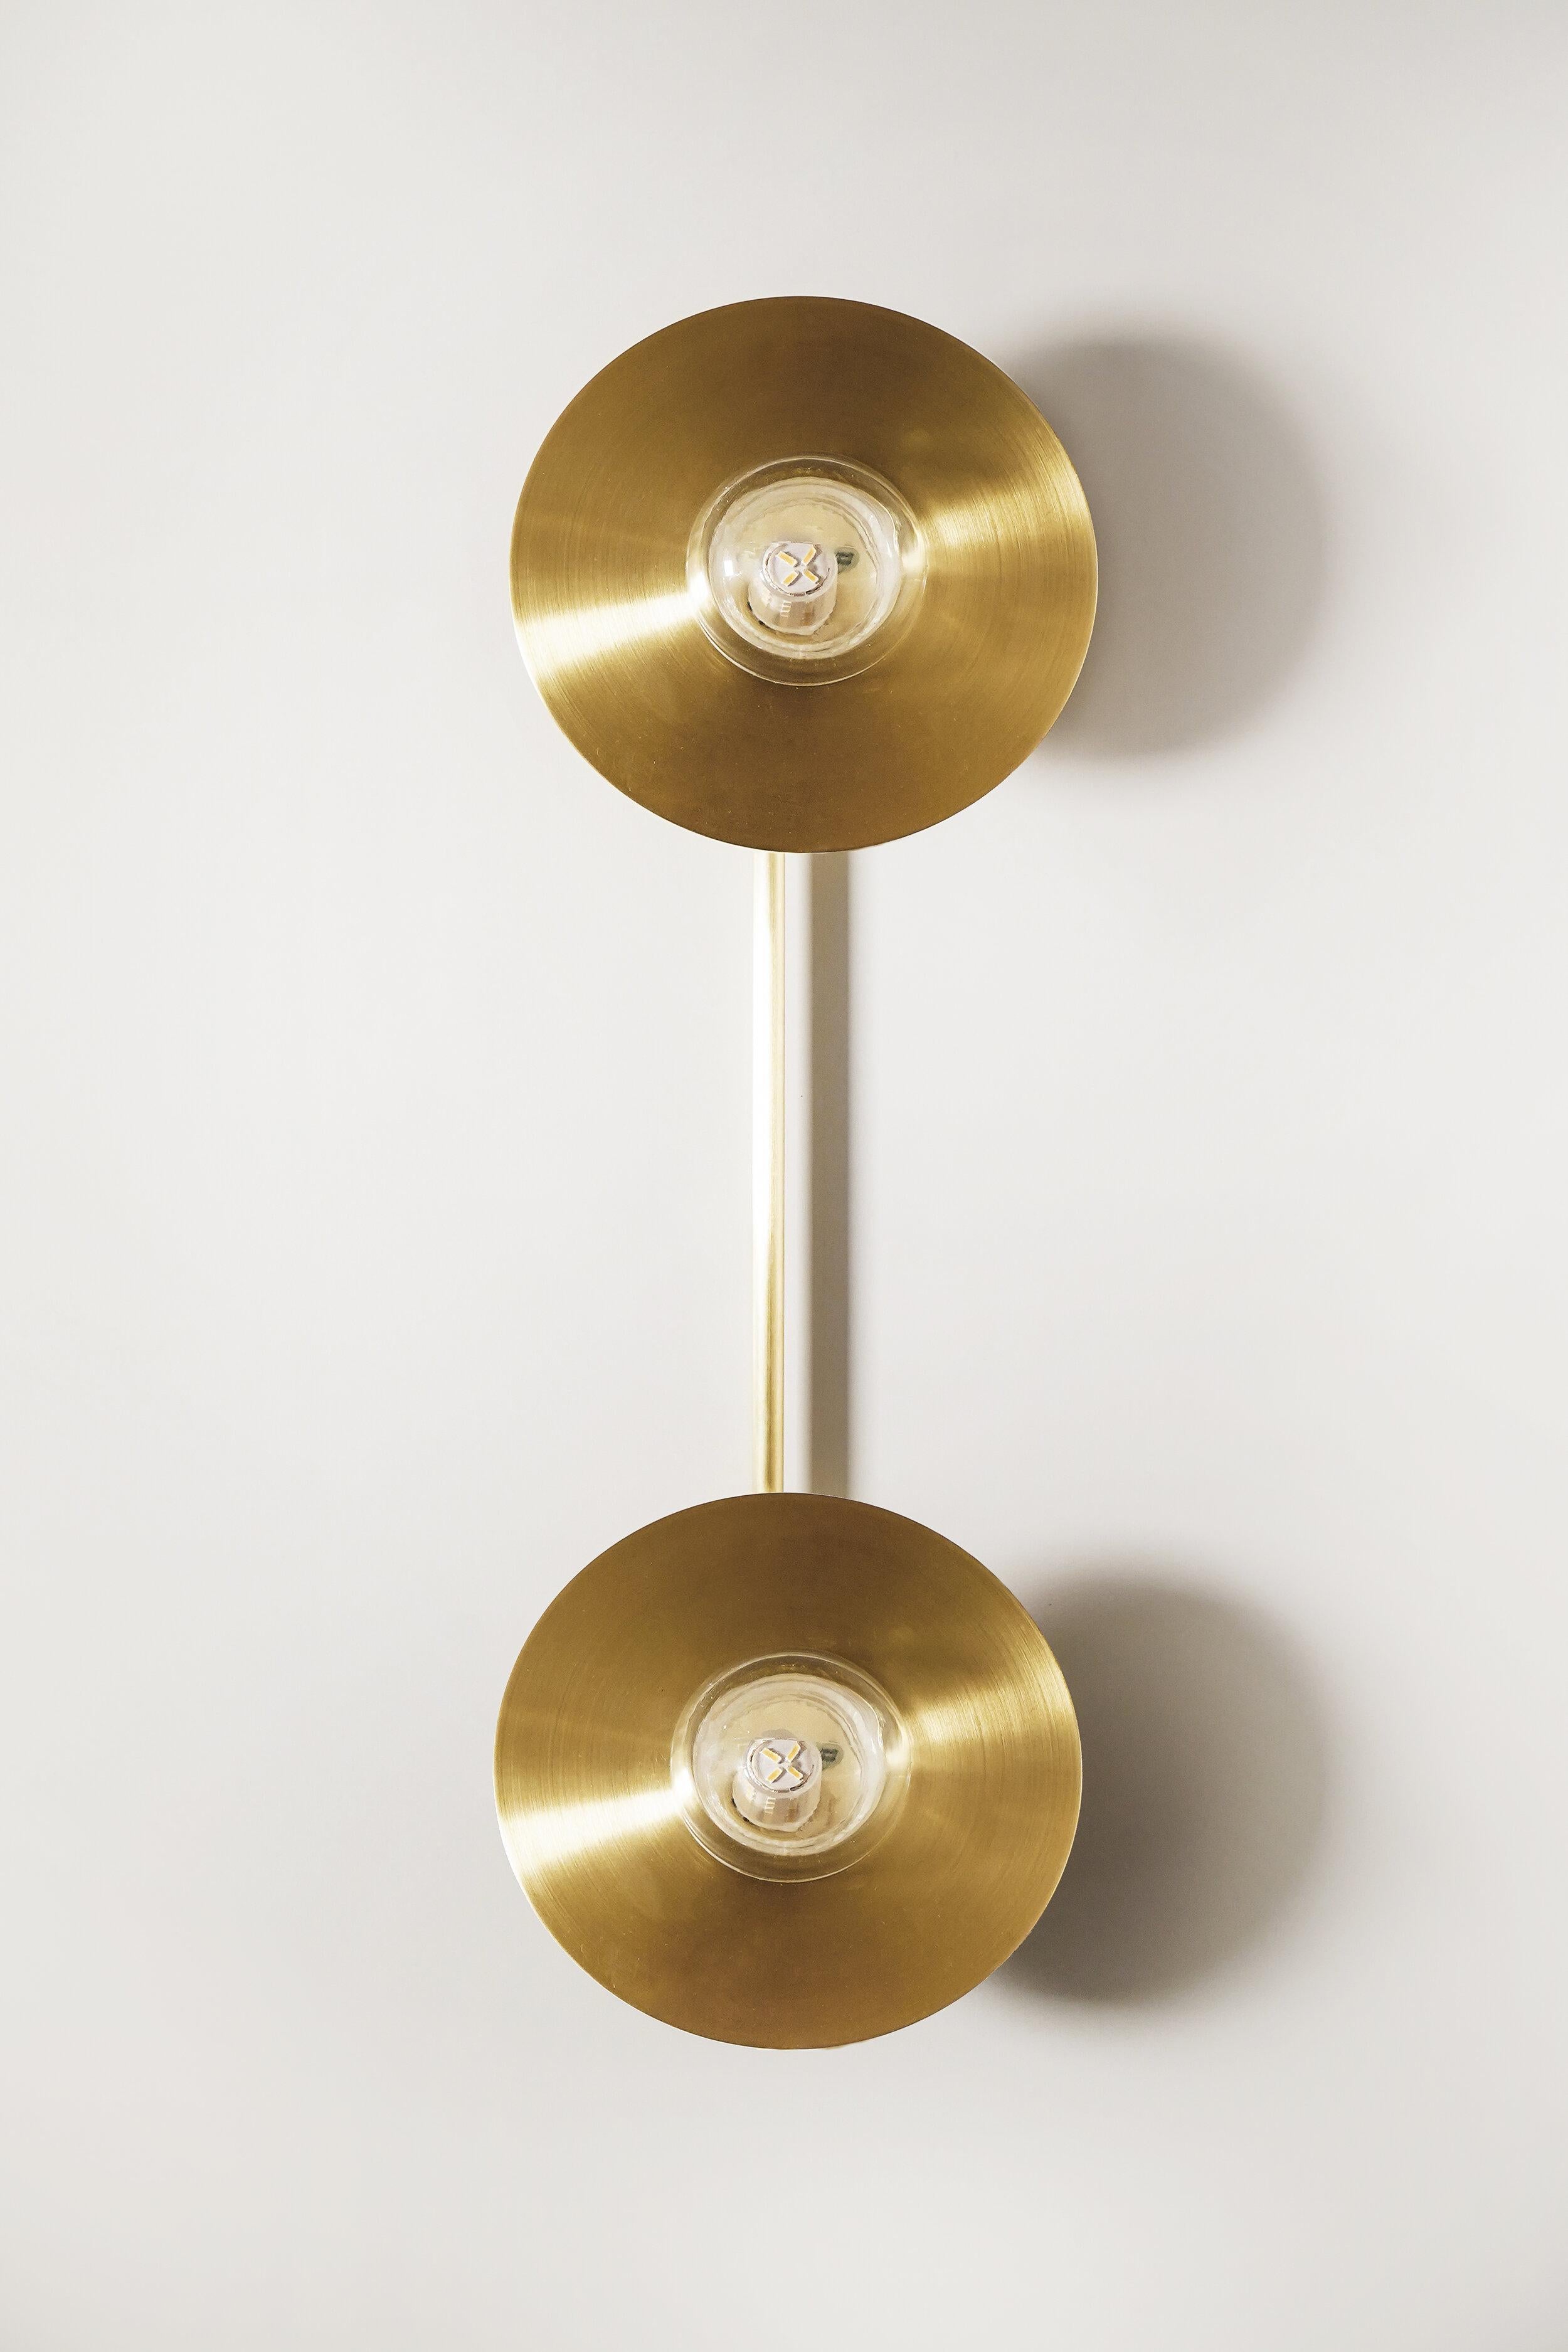 Alba Double Wall Light XL by Contain
Dimensions: D 22 x W 60 x H 11.5 cm 
Materials: brass, 3D printed PLA structure and optical lens.

Also available in different finishes and dimensions (15 cm Ø x 60 cm x 11,5 cm and 22 cm Ø x 60 cm x 11,5